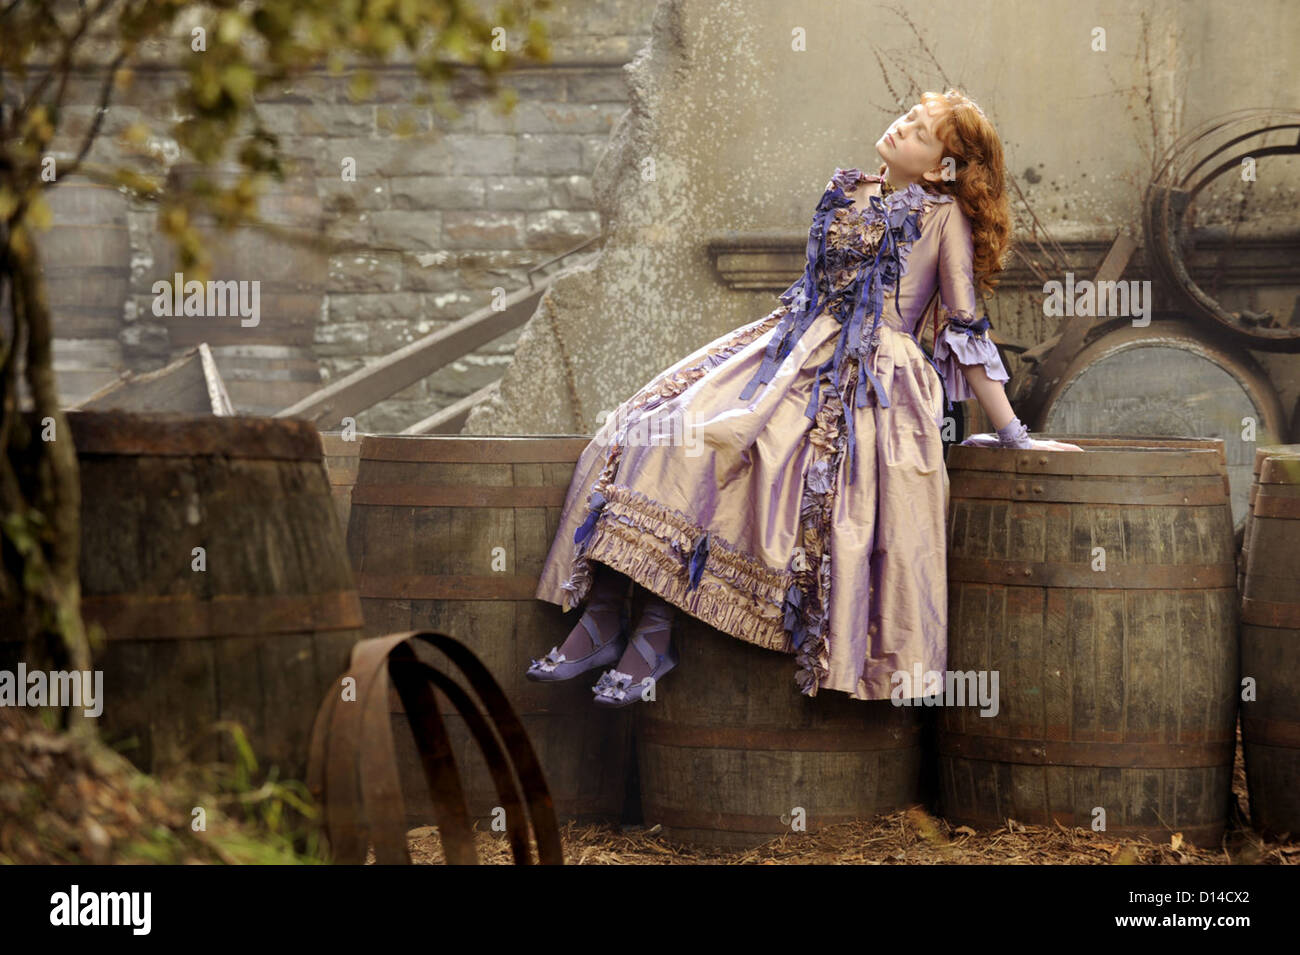 GREAT EXPECTATIONS (2012) HELENA BARLOW, MIKE NEWELL (DIR) 006 MOVIESTORE COLLECTION LTD Stock Photo